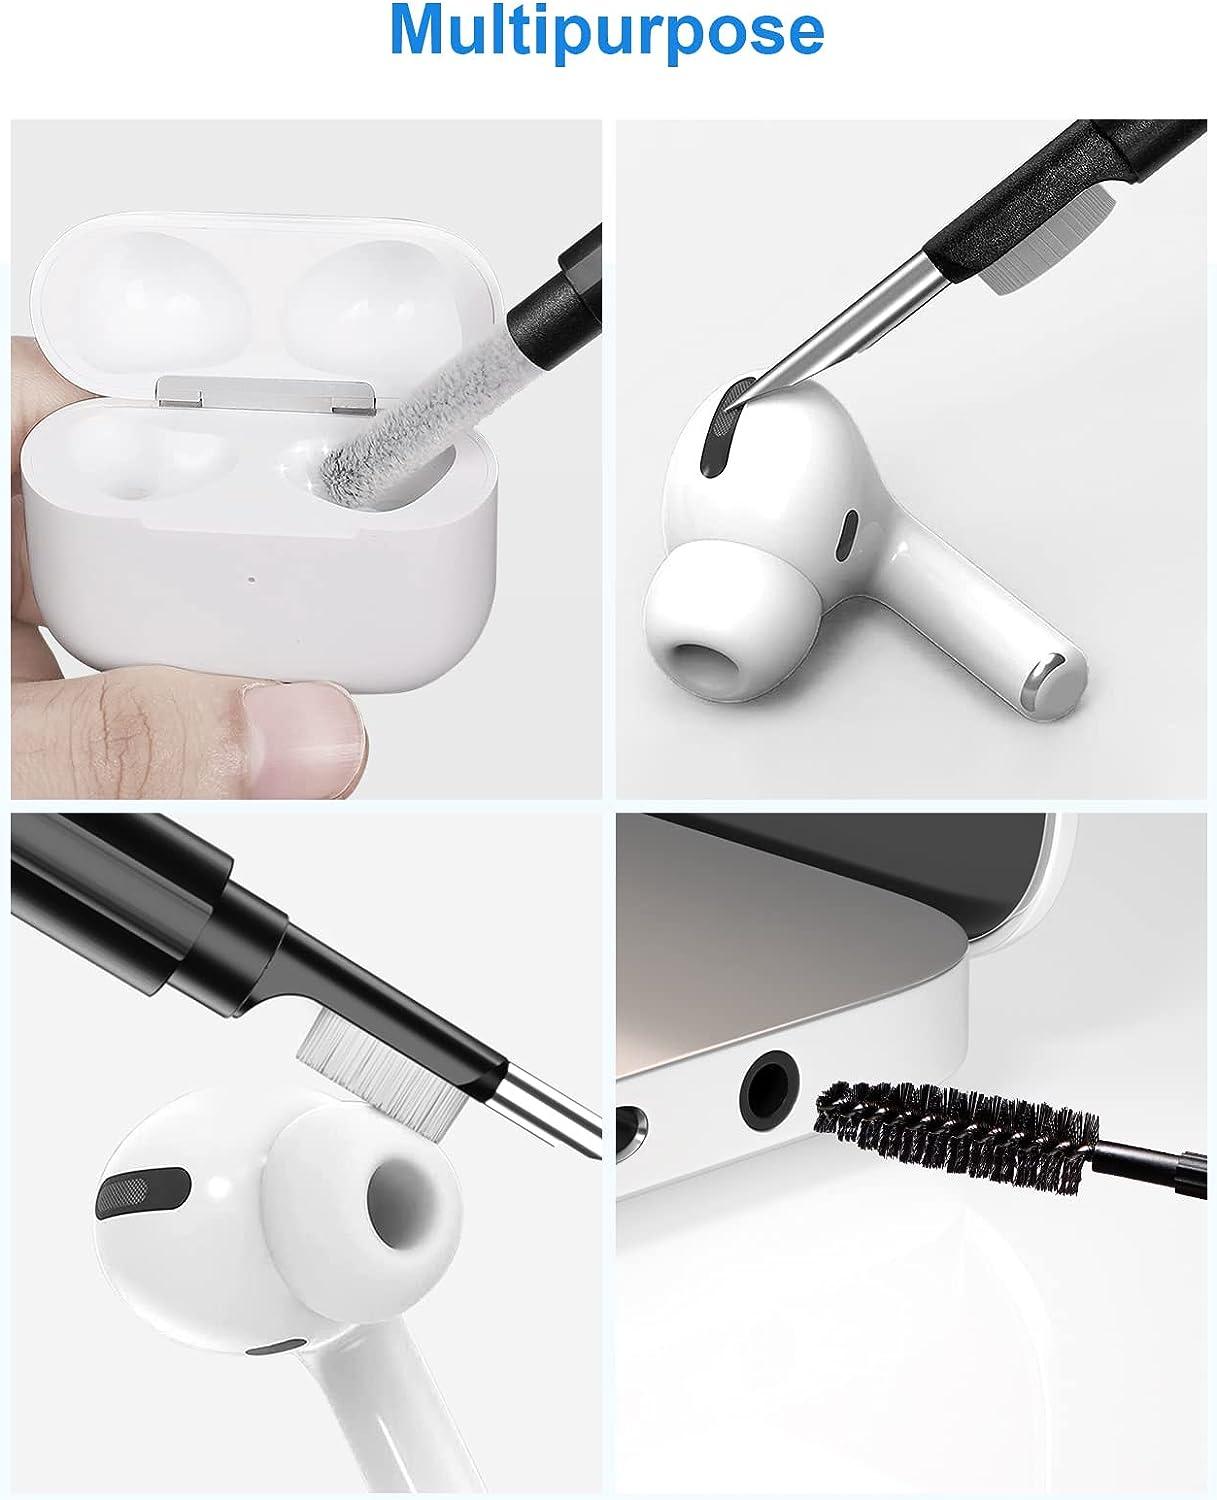  Aijeff Cleaner Kit for Airpods Pro 1 2 3, Multi-Function [8 in  1] Cleaning Kit for Earphone, Smartphones, Tablets, Laptop, Keyboard  Cleaning Tool for iPhone iPod : Electronics